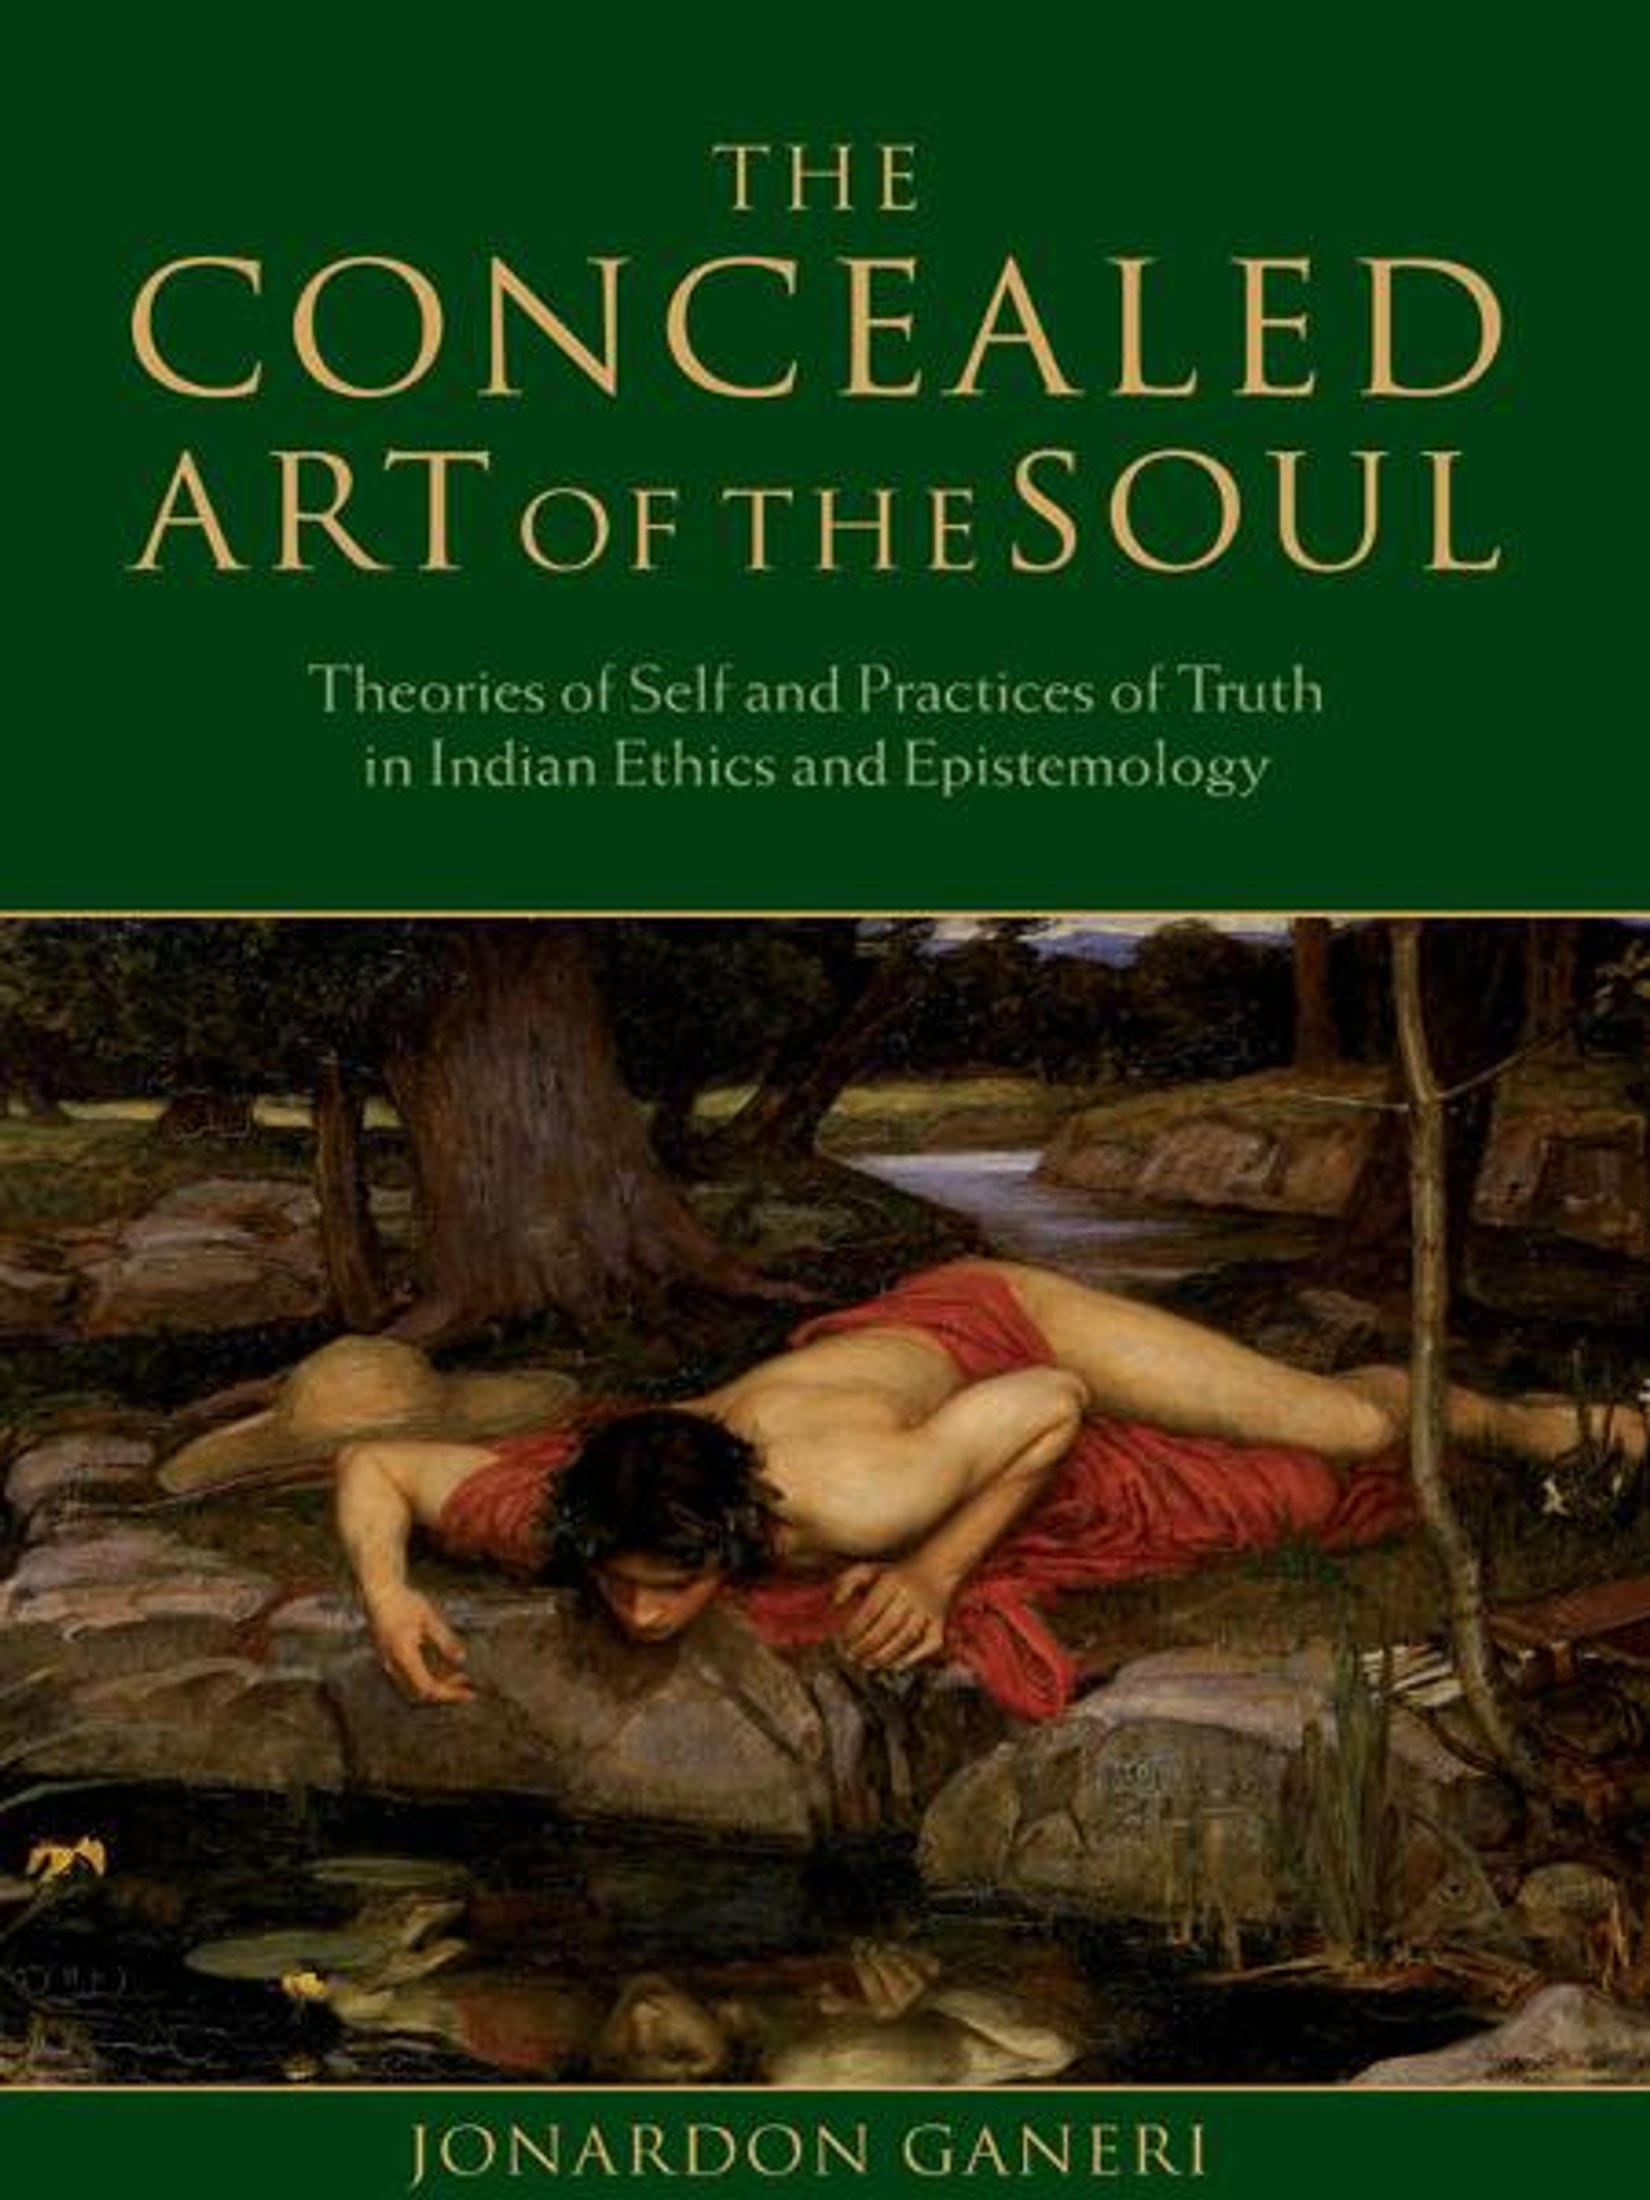 The Concealed Art of the Soul: Theories of Self and Practices of Truth in Indian Ethics and Epistemology